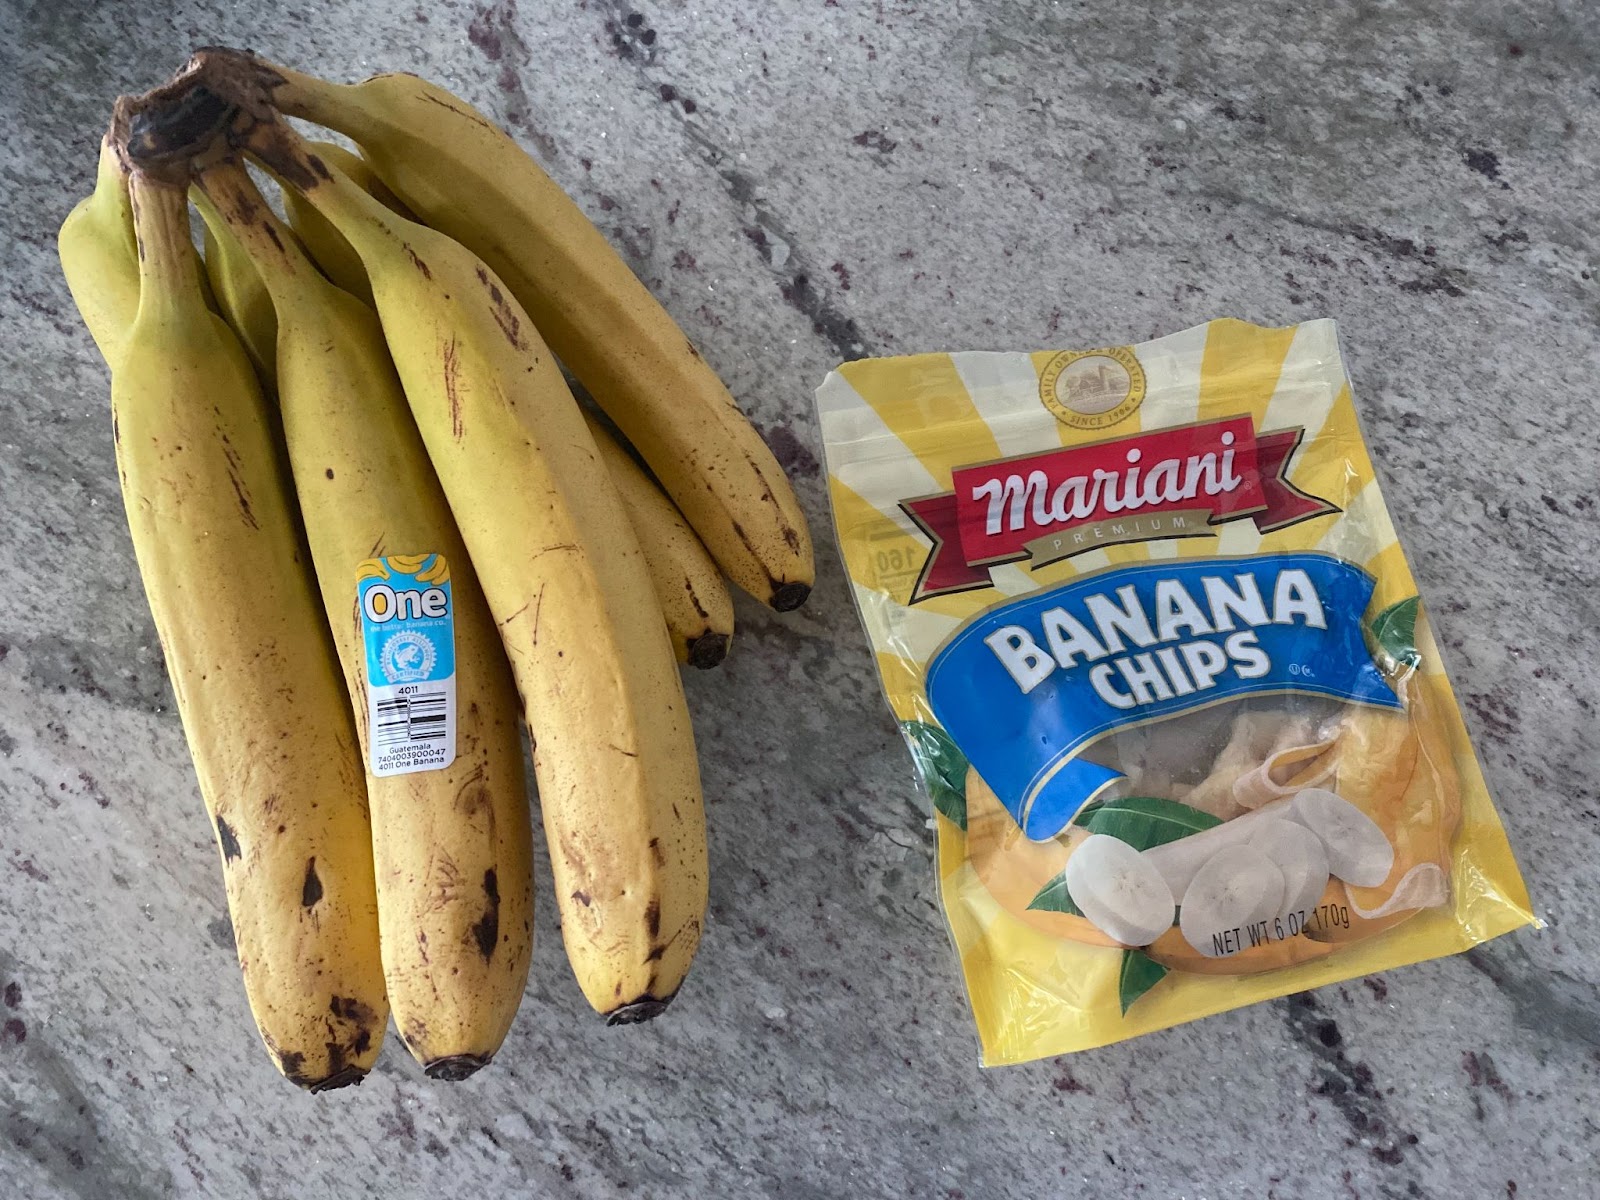 Photo of a chip bag and a bunch of bananas